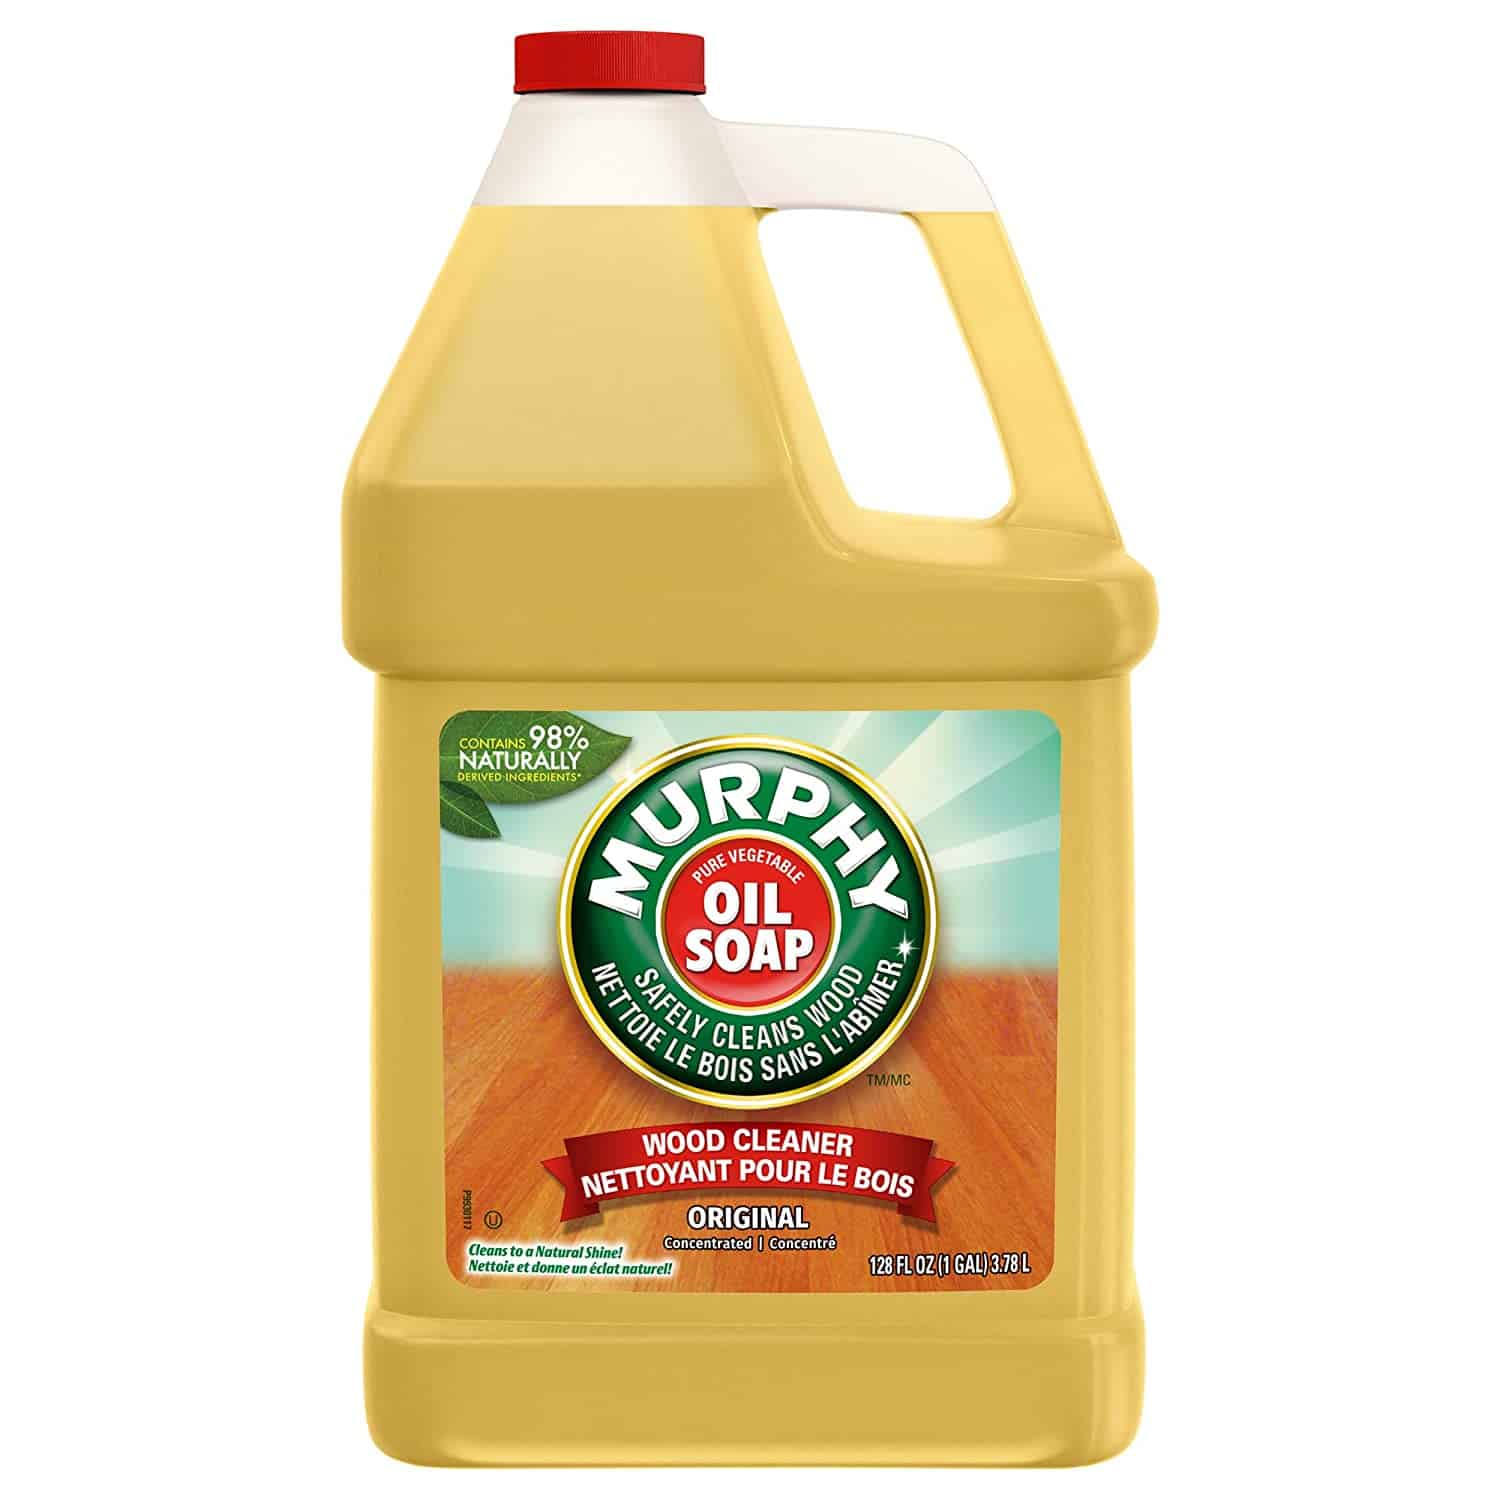 MURPHY OIL SOAP Wood Cleaner